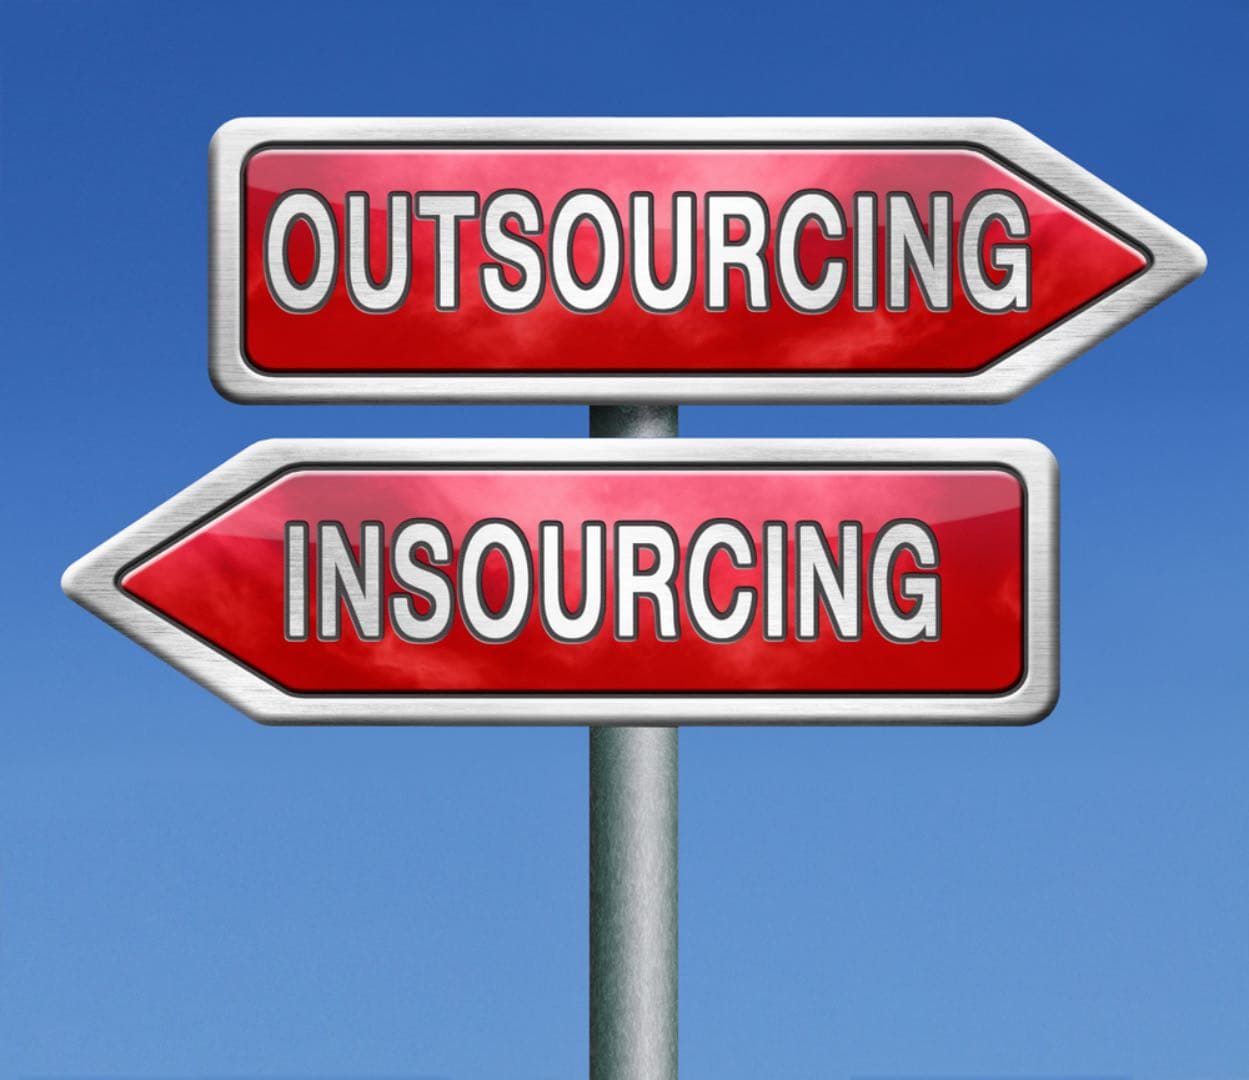 Insourcing vs Outsourcing: What’s Best for My Digital Marketing